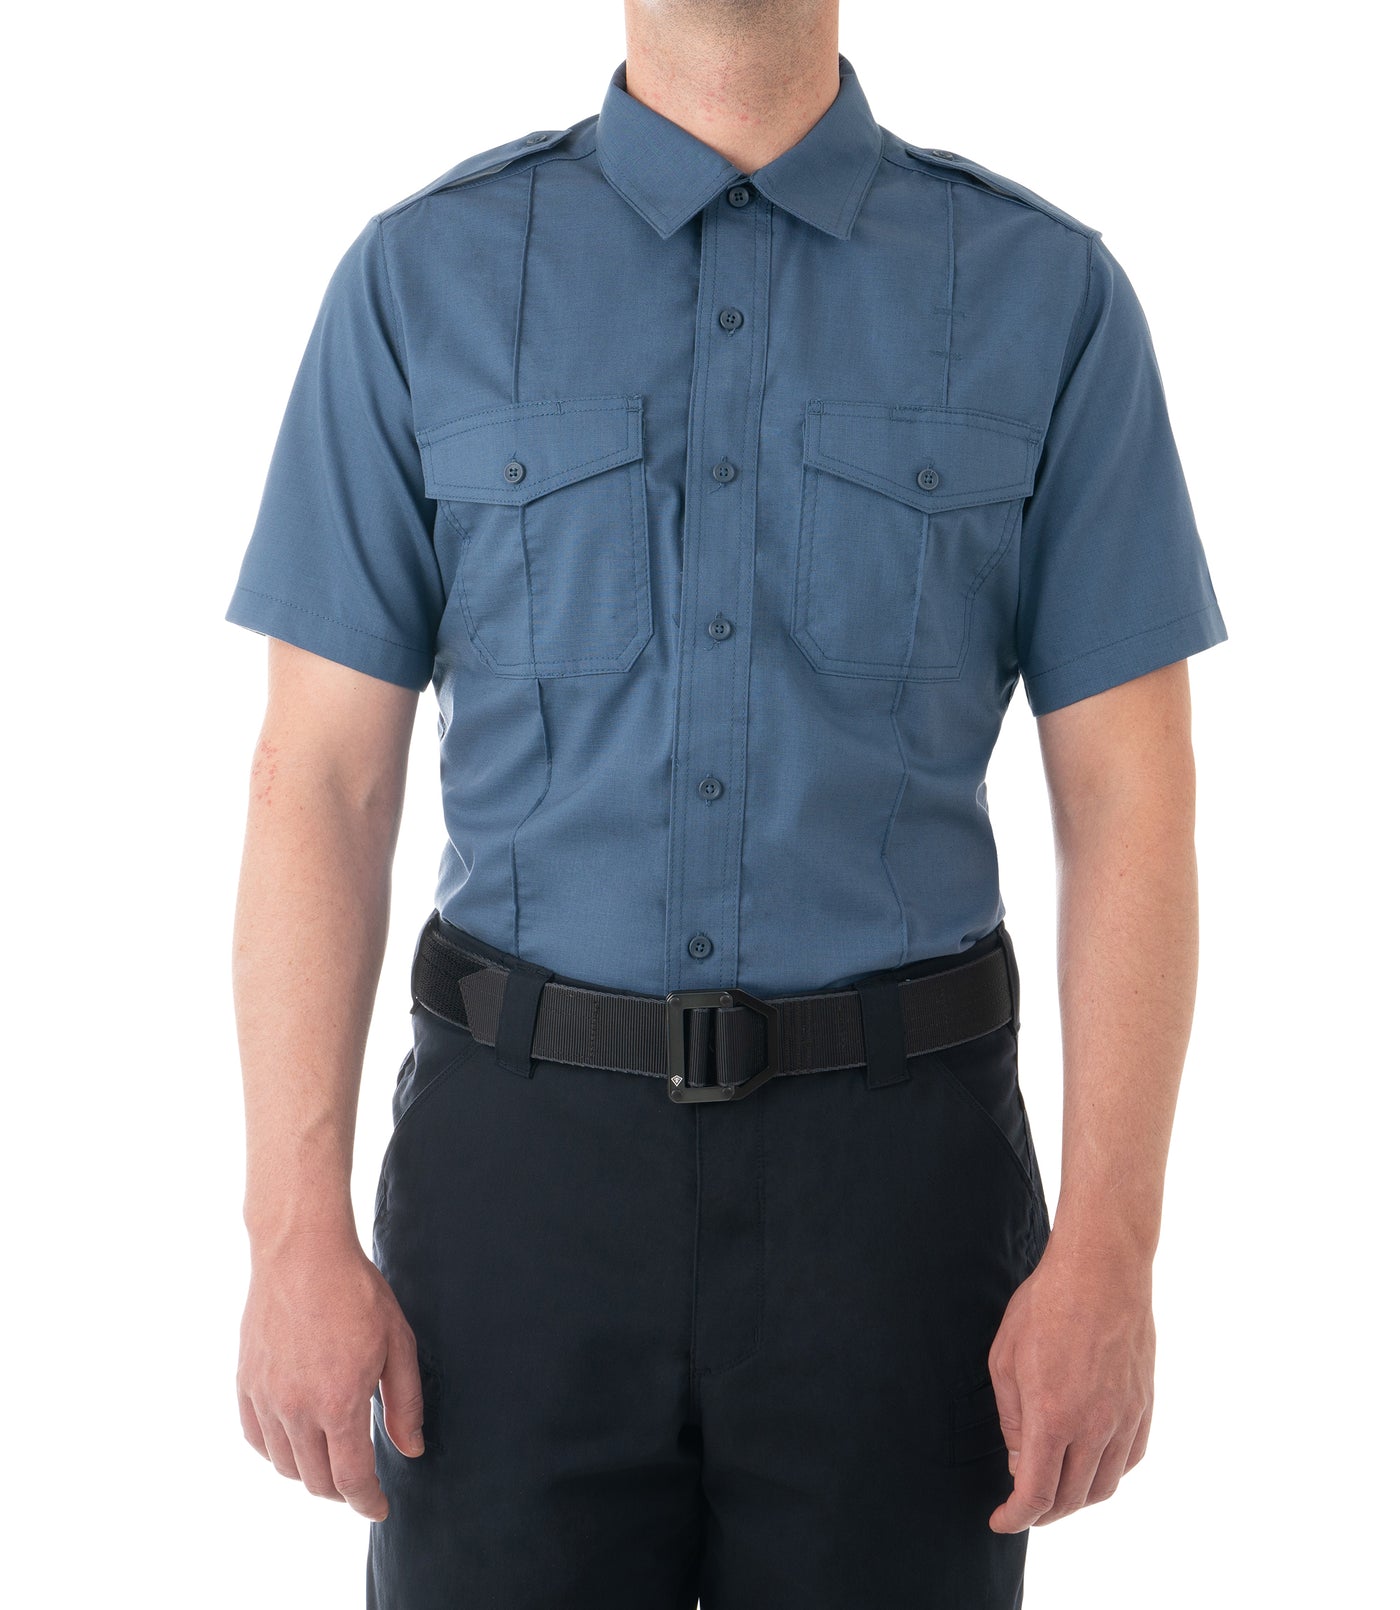 Front of Men's Pro Duty Uniform Short Sleeve Shirt in French Blue